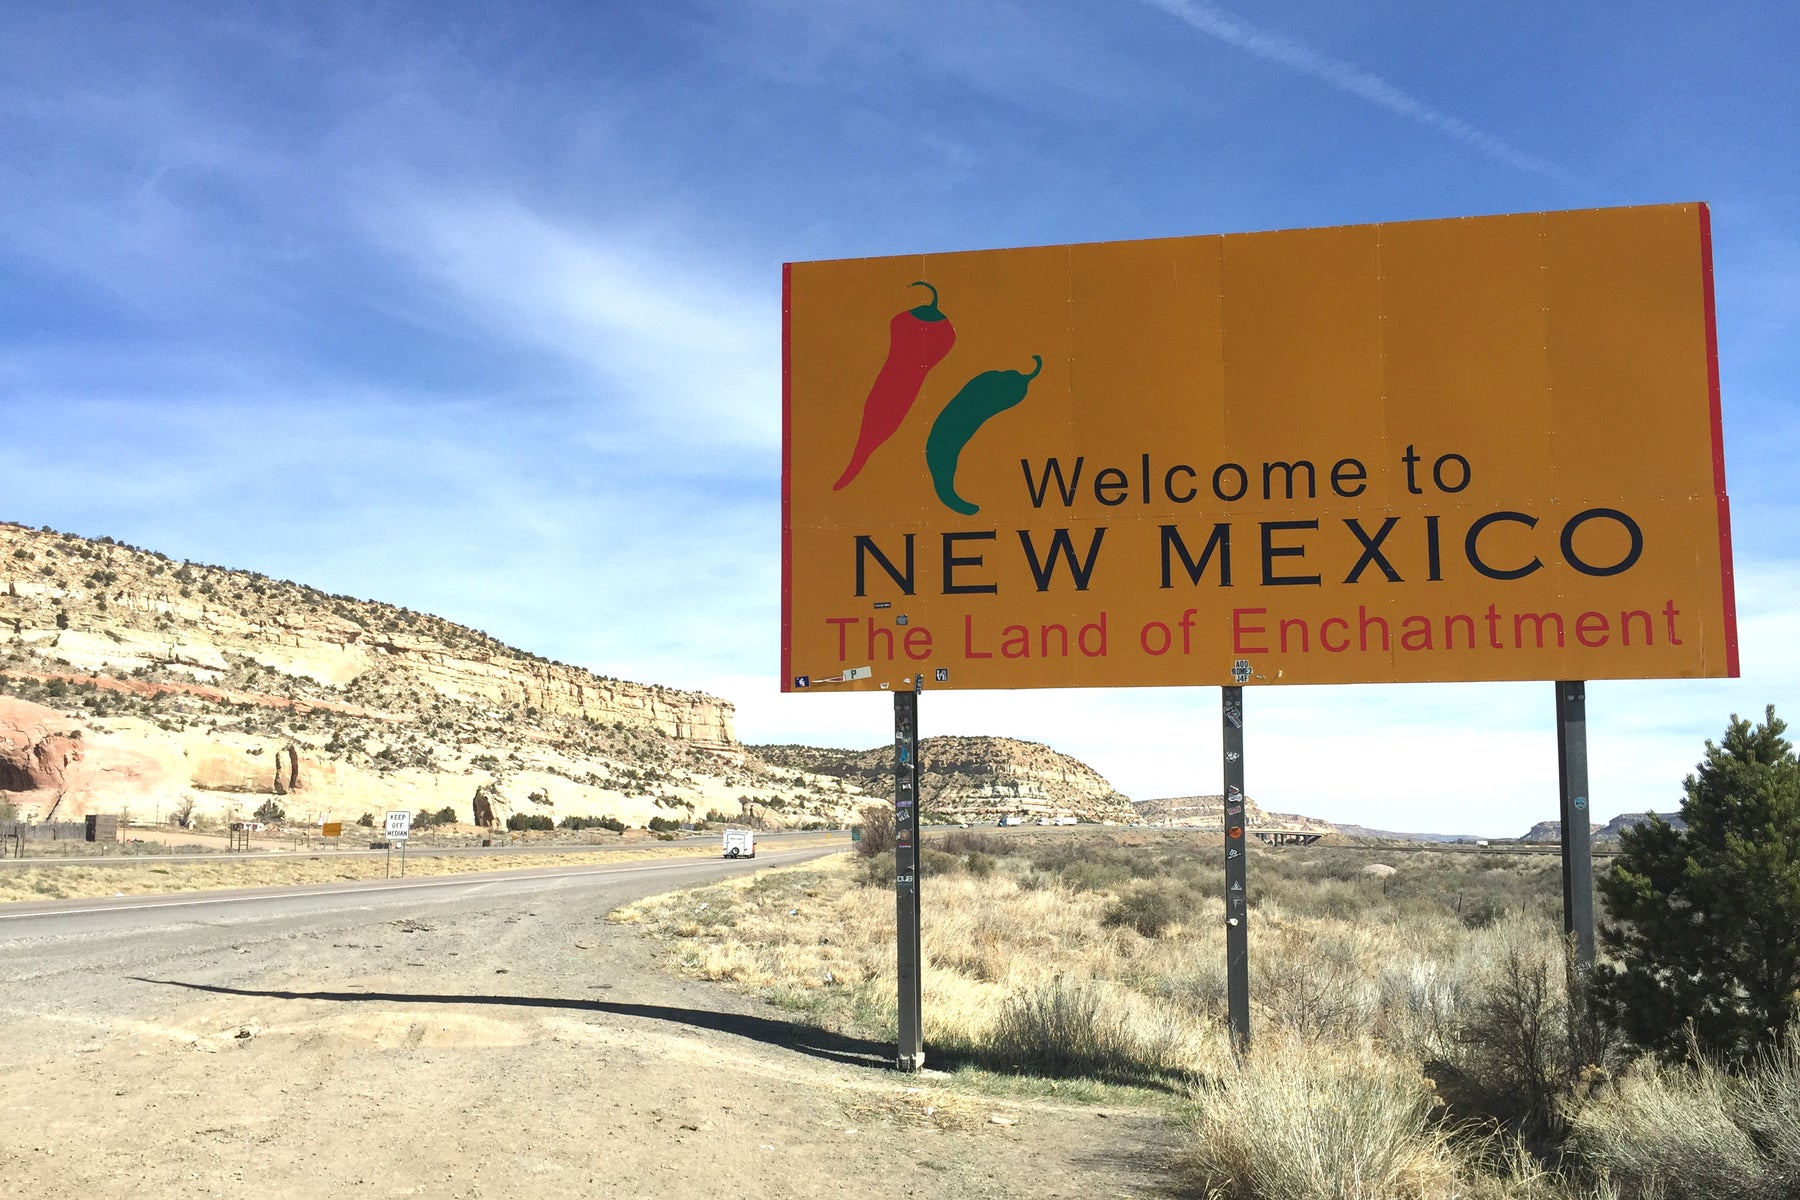 NEW MEXICO BECOMES THE 16th STATE TO LEGALIZE